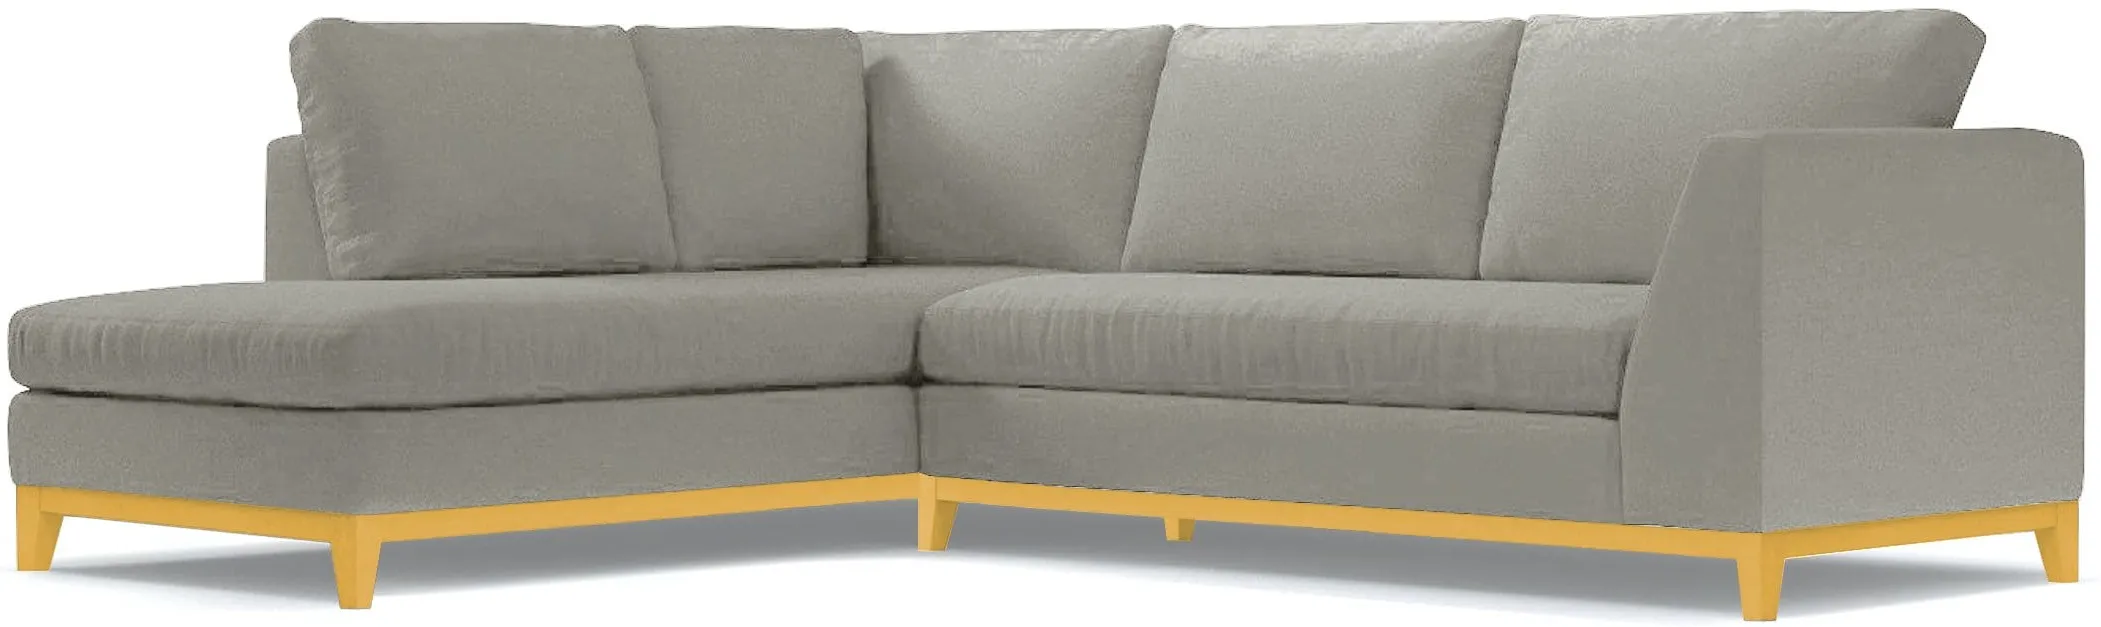 Mulholland Drive 2pc Sectional Sofa